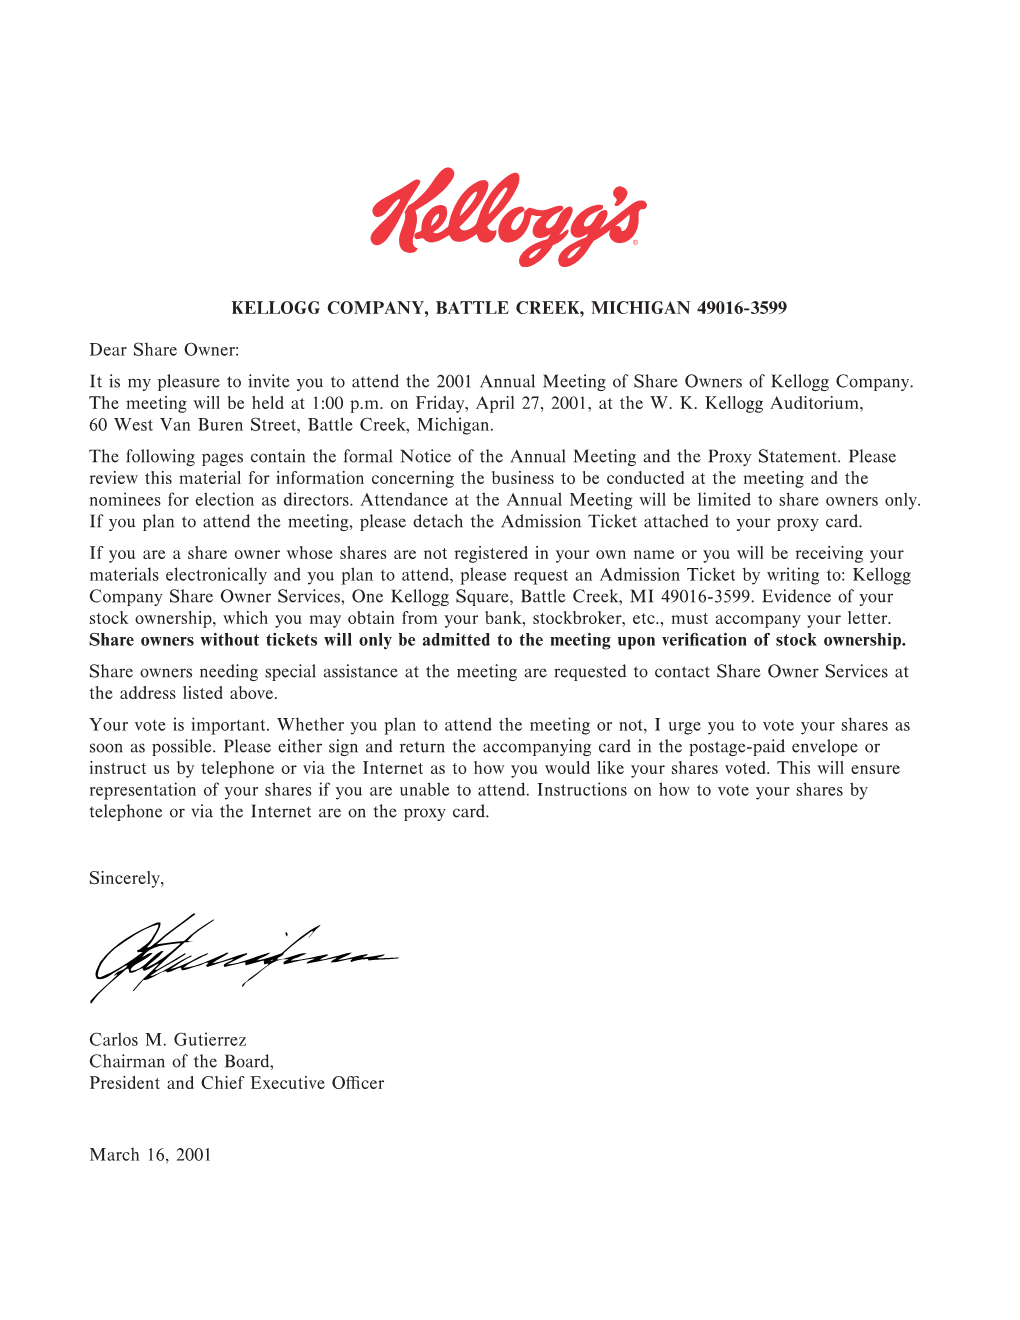 It Is My Pleasure to Invite You to Attend the 2001 Annual Meeting of Share Owners of Kellogg Company